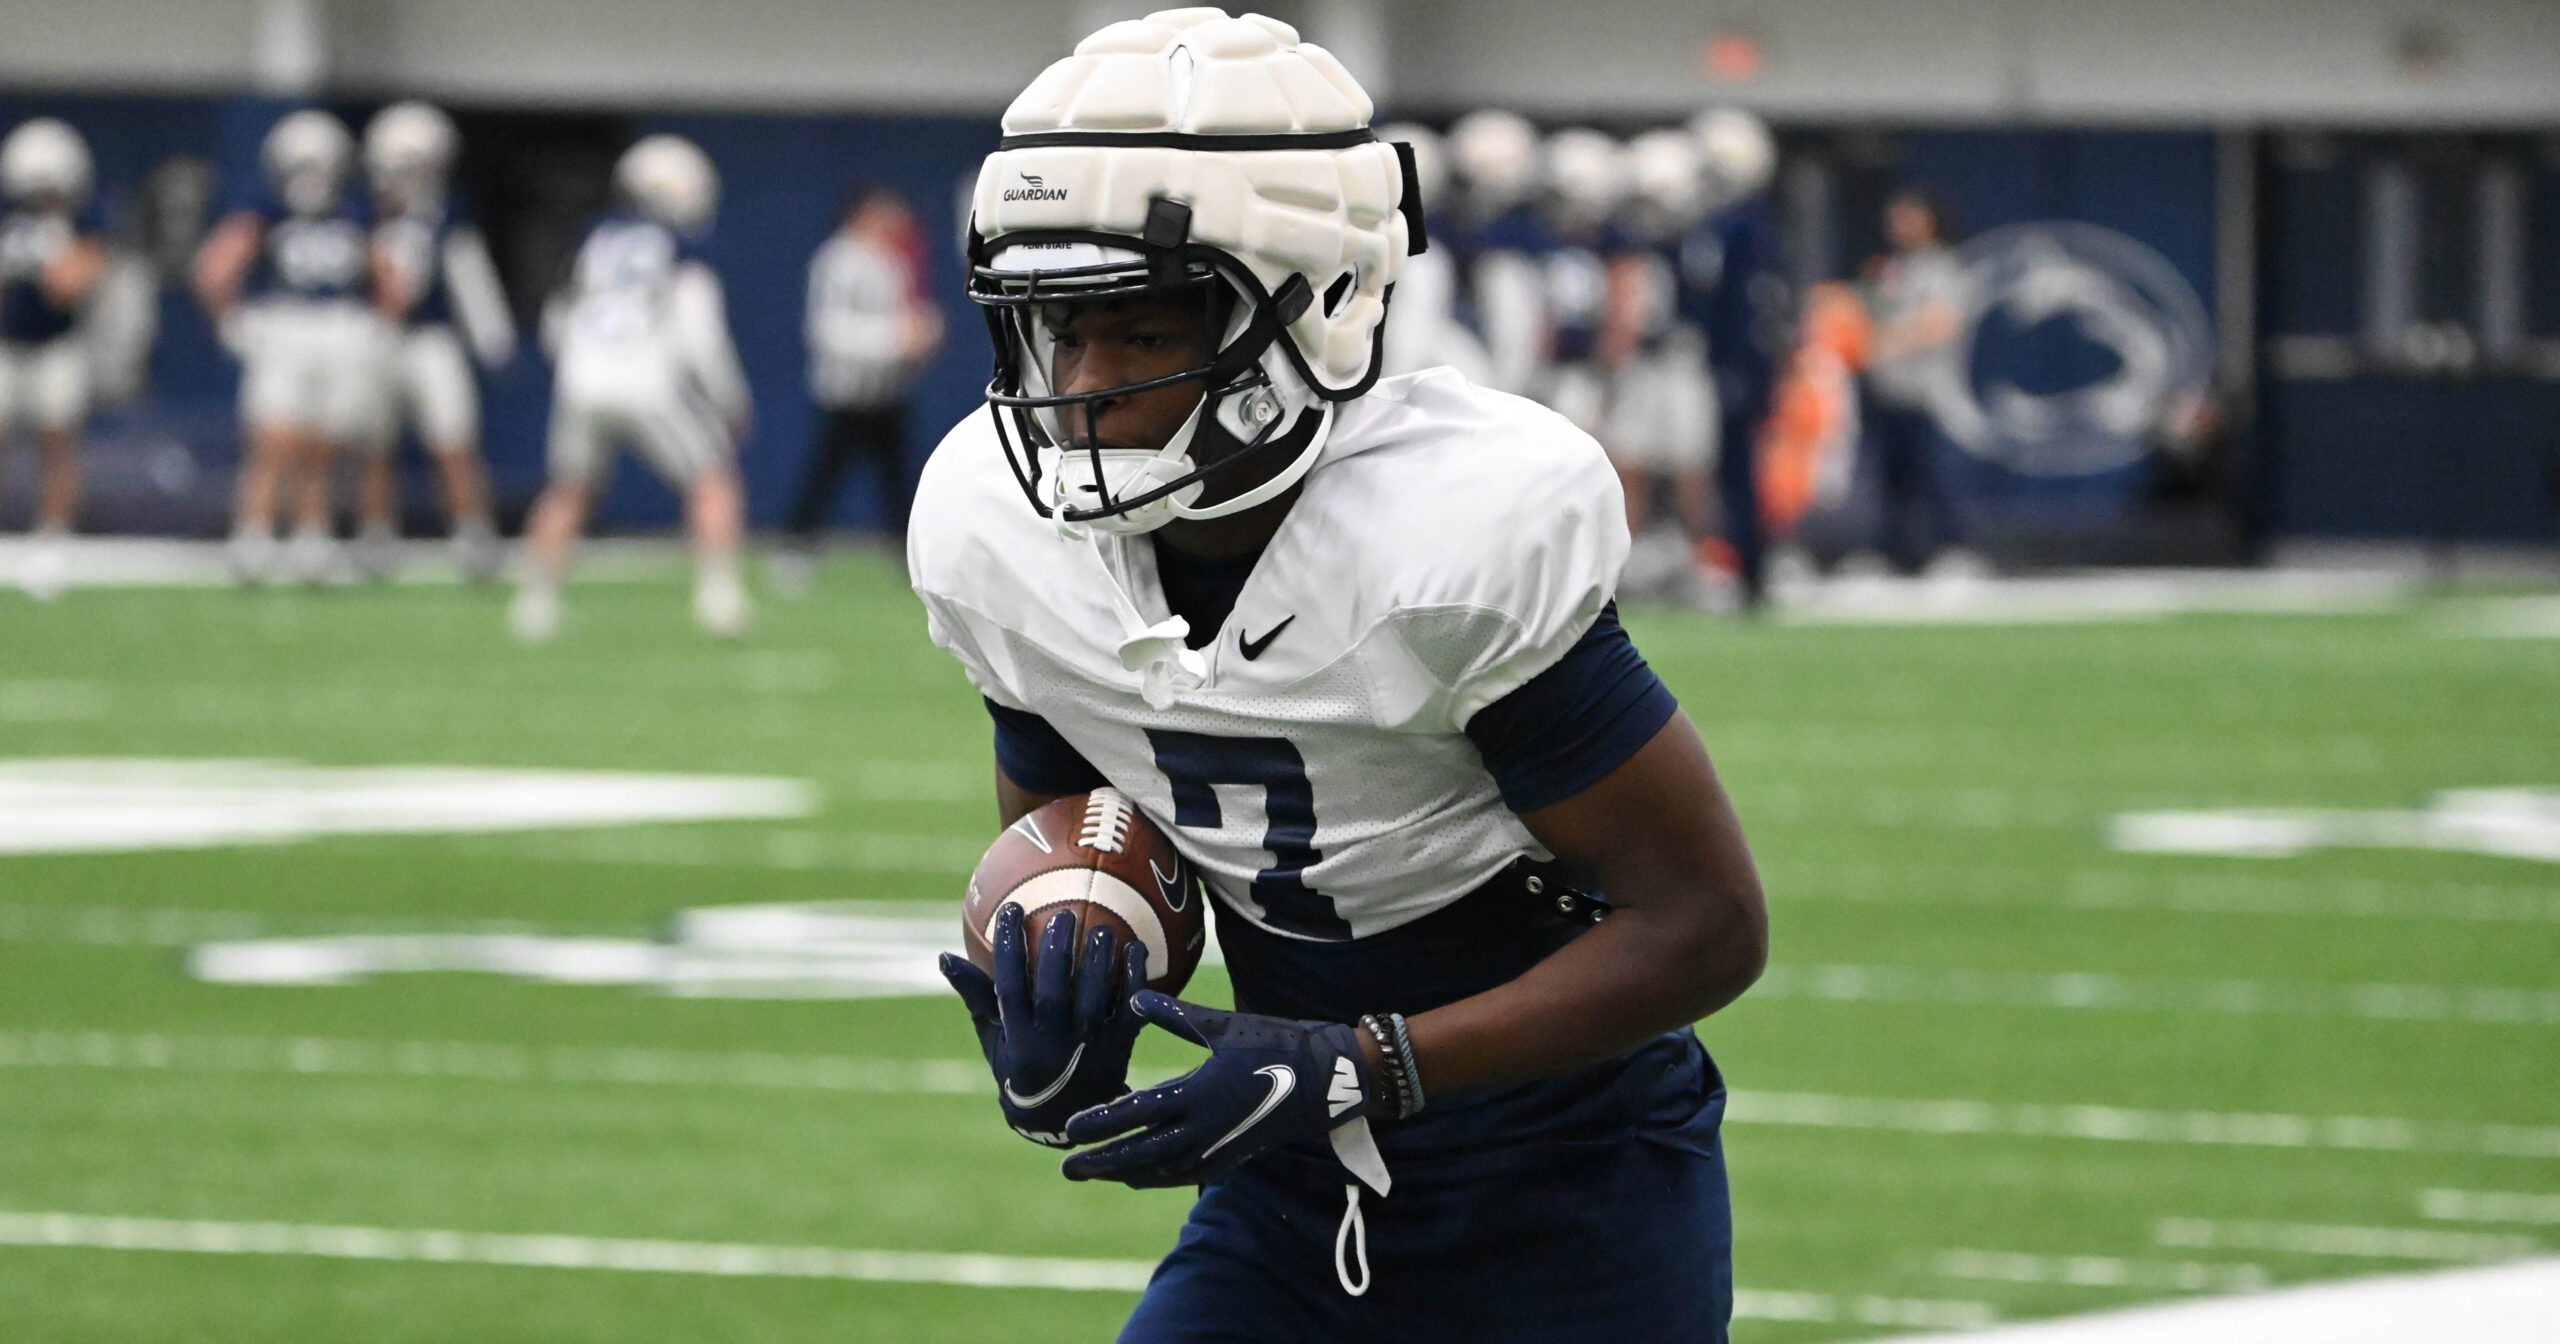 Penn State wide receiver Anthony Ivey